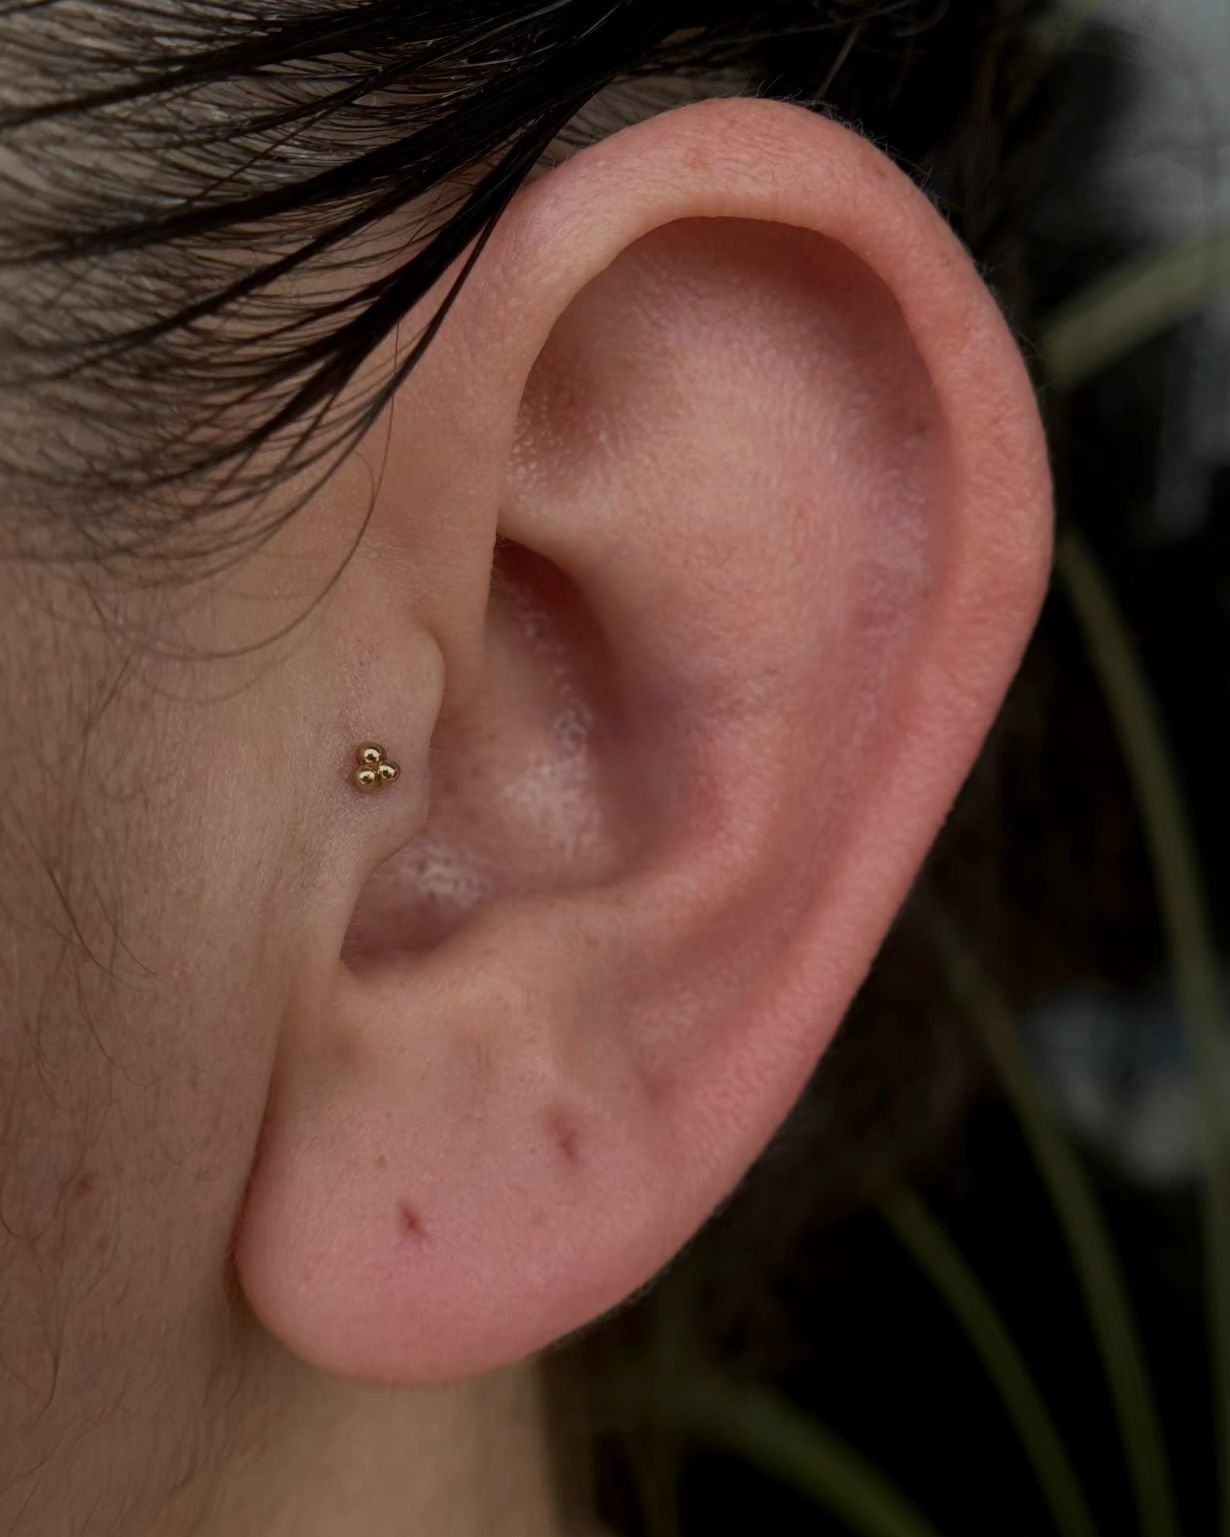 Tri-beads are one of our favorite jewelry picks for tragus piercings. ✨

This one by @ozbri is so cute! I wonder if this first timer will come back to let us add another on top. 🤔 😍